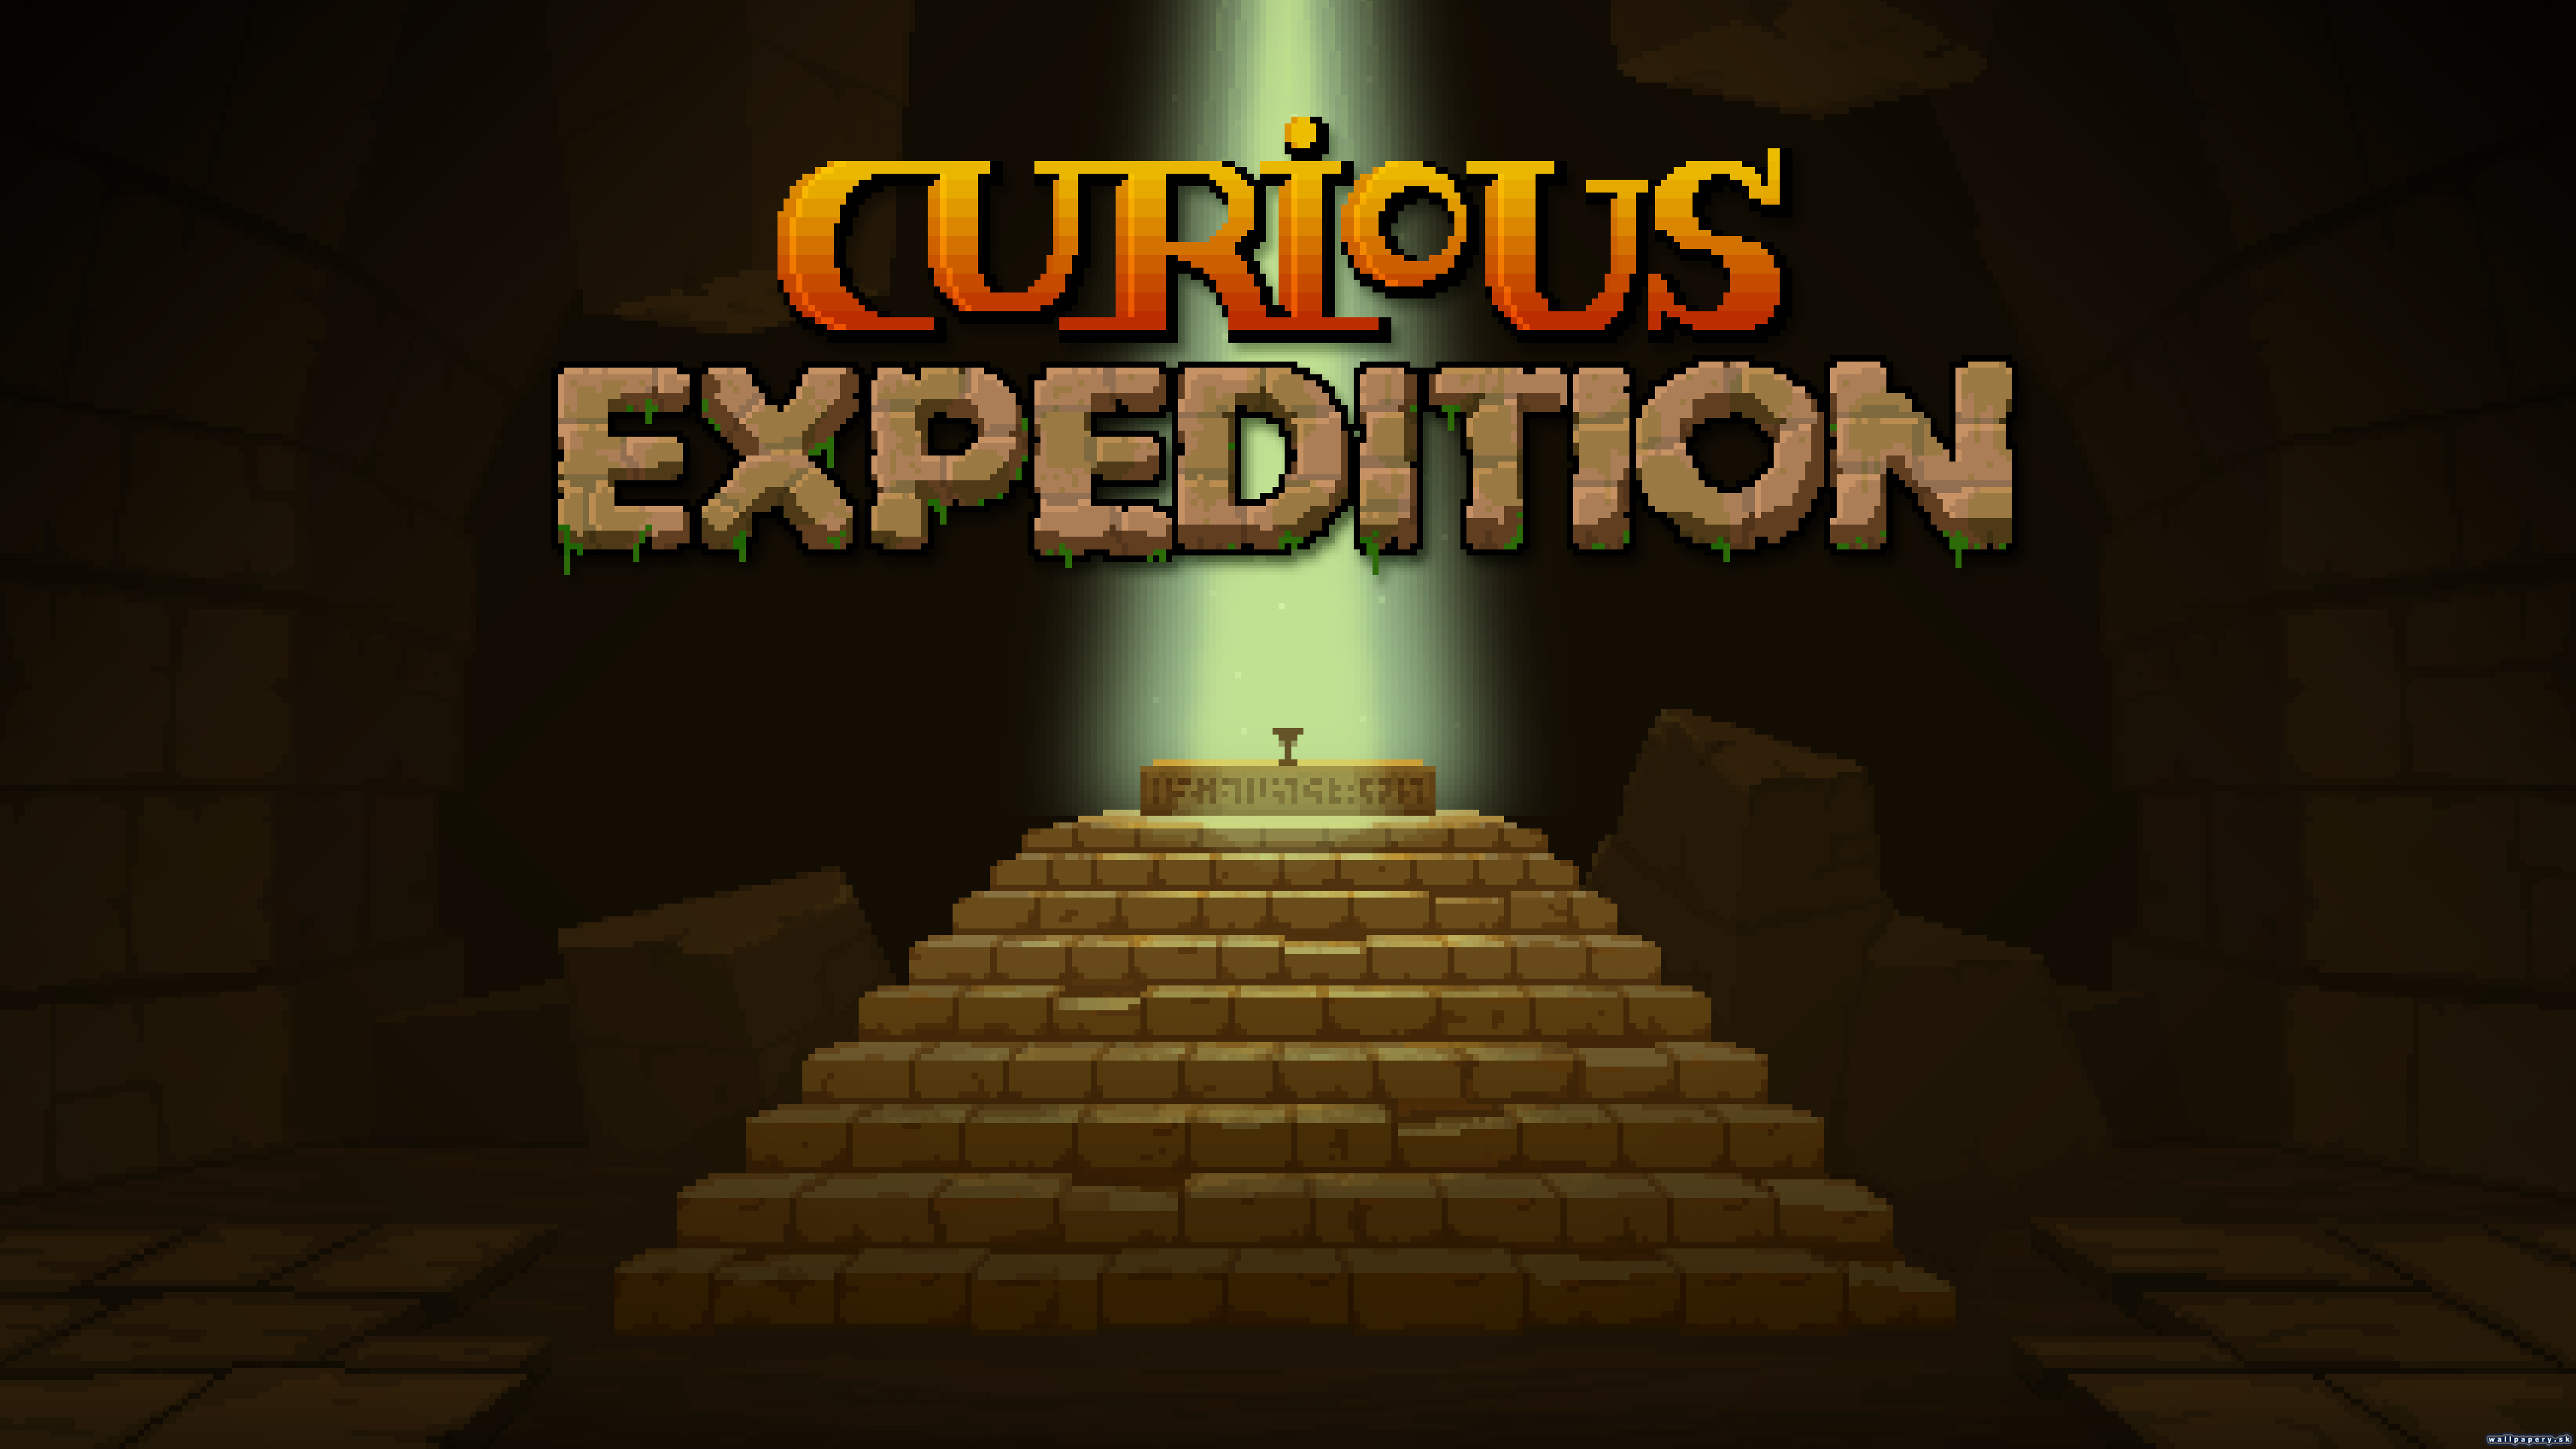 Curious Expedition - wallpaper 3